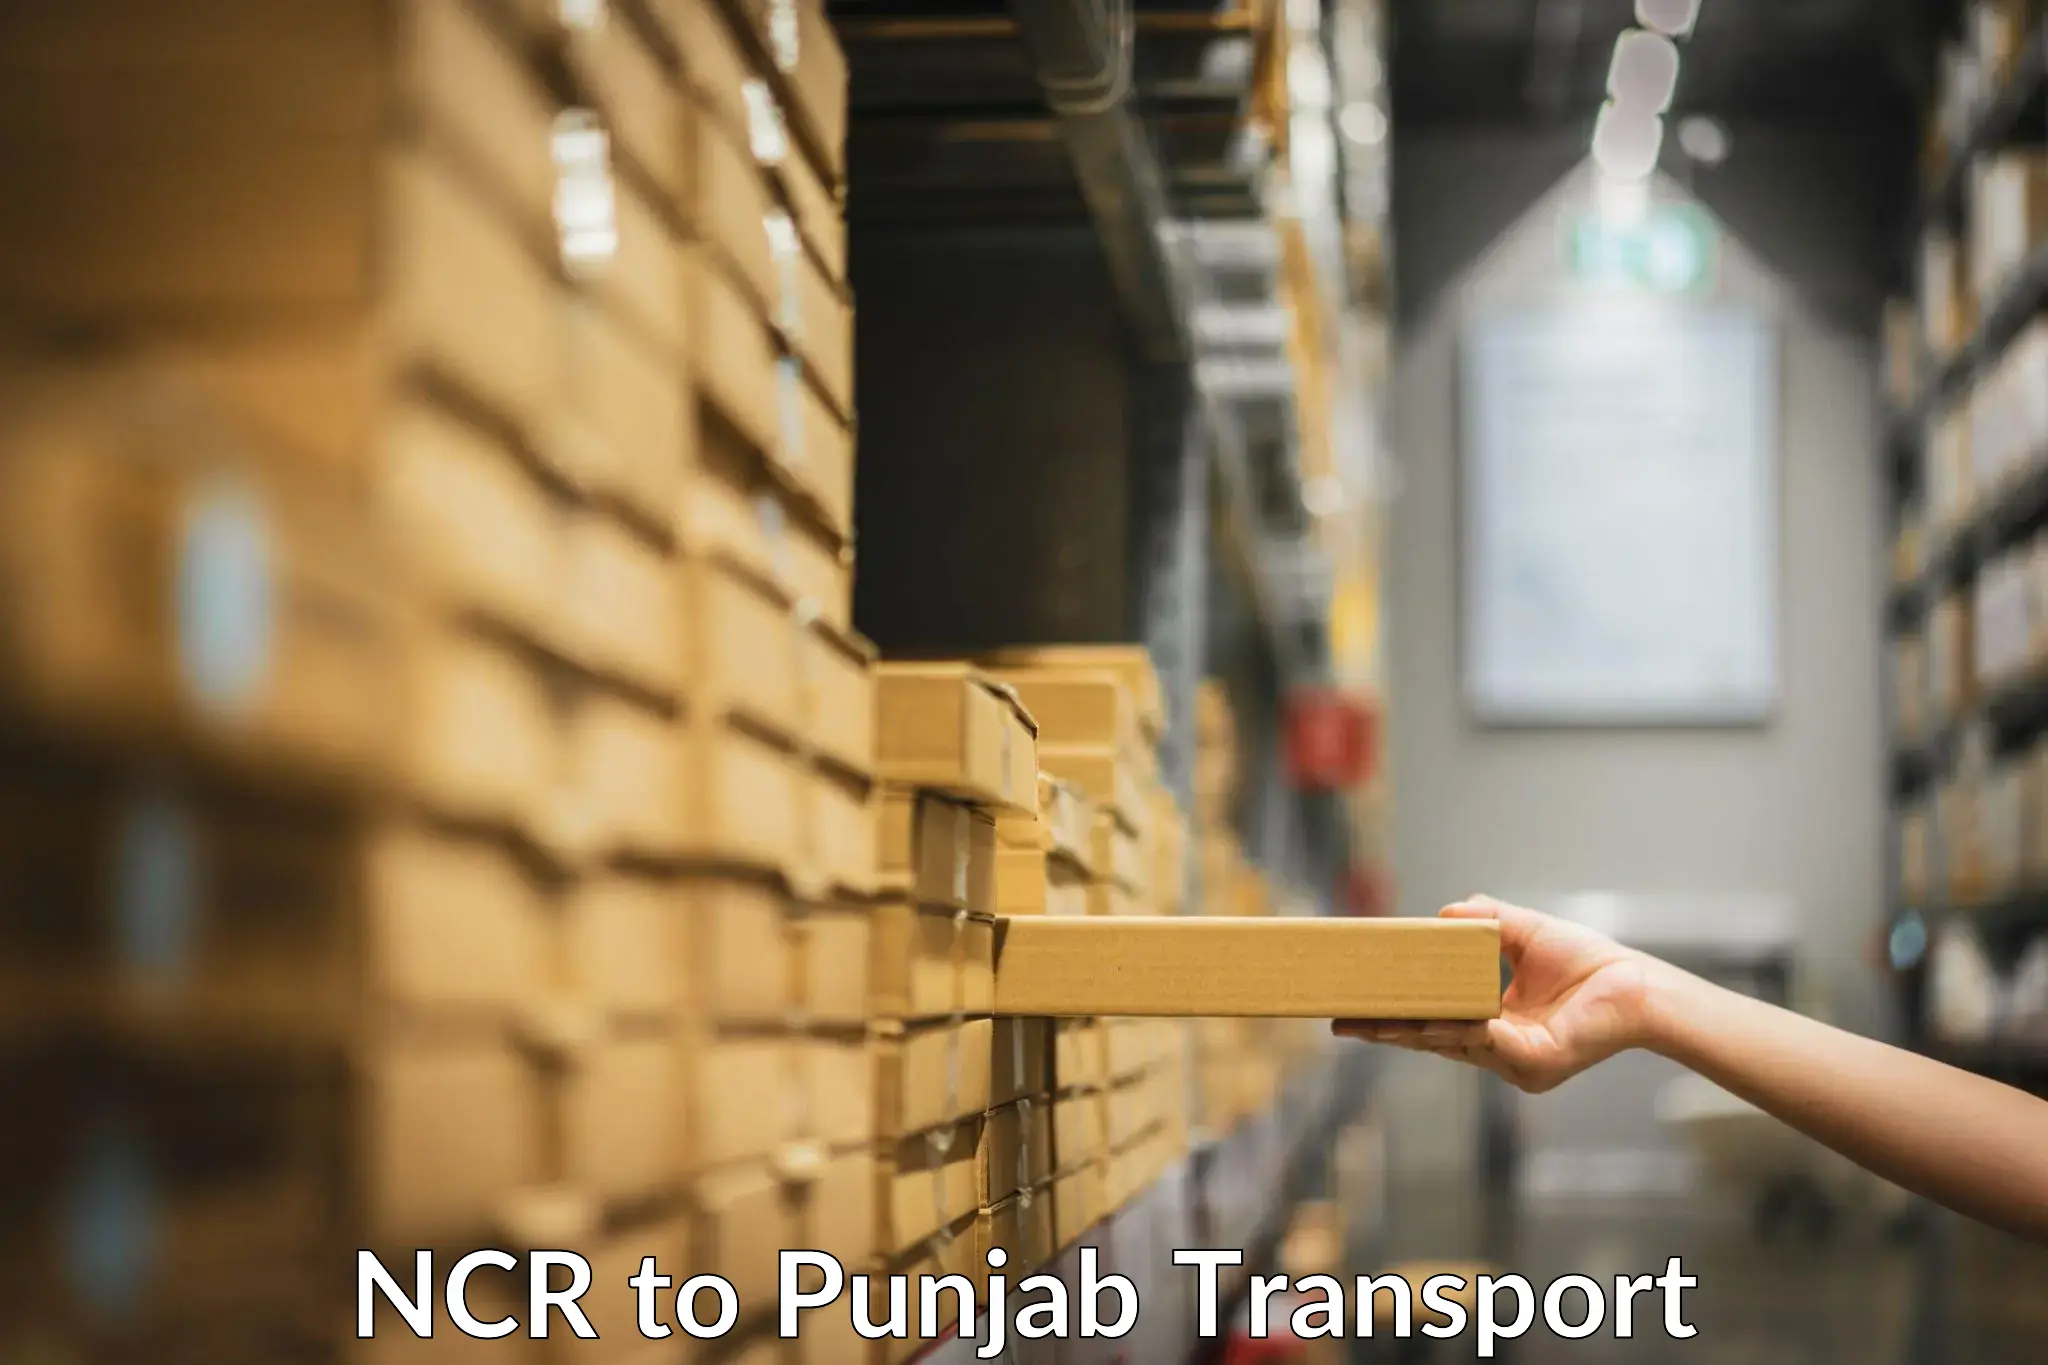 Delivery service NCR to Rajpura